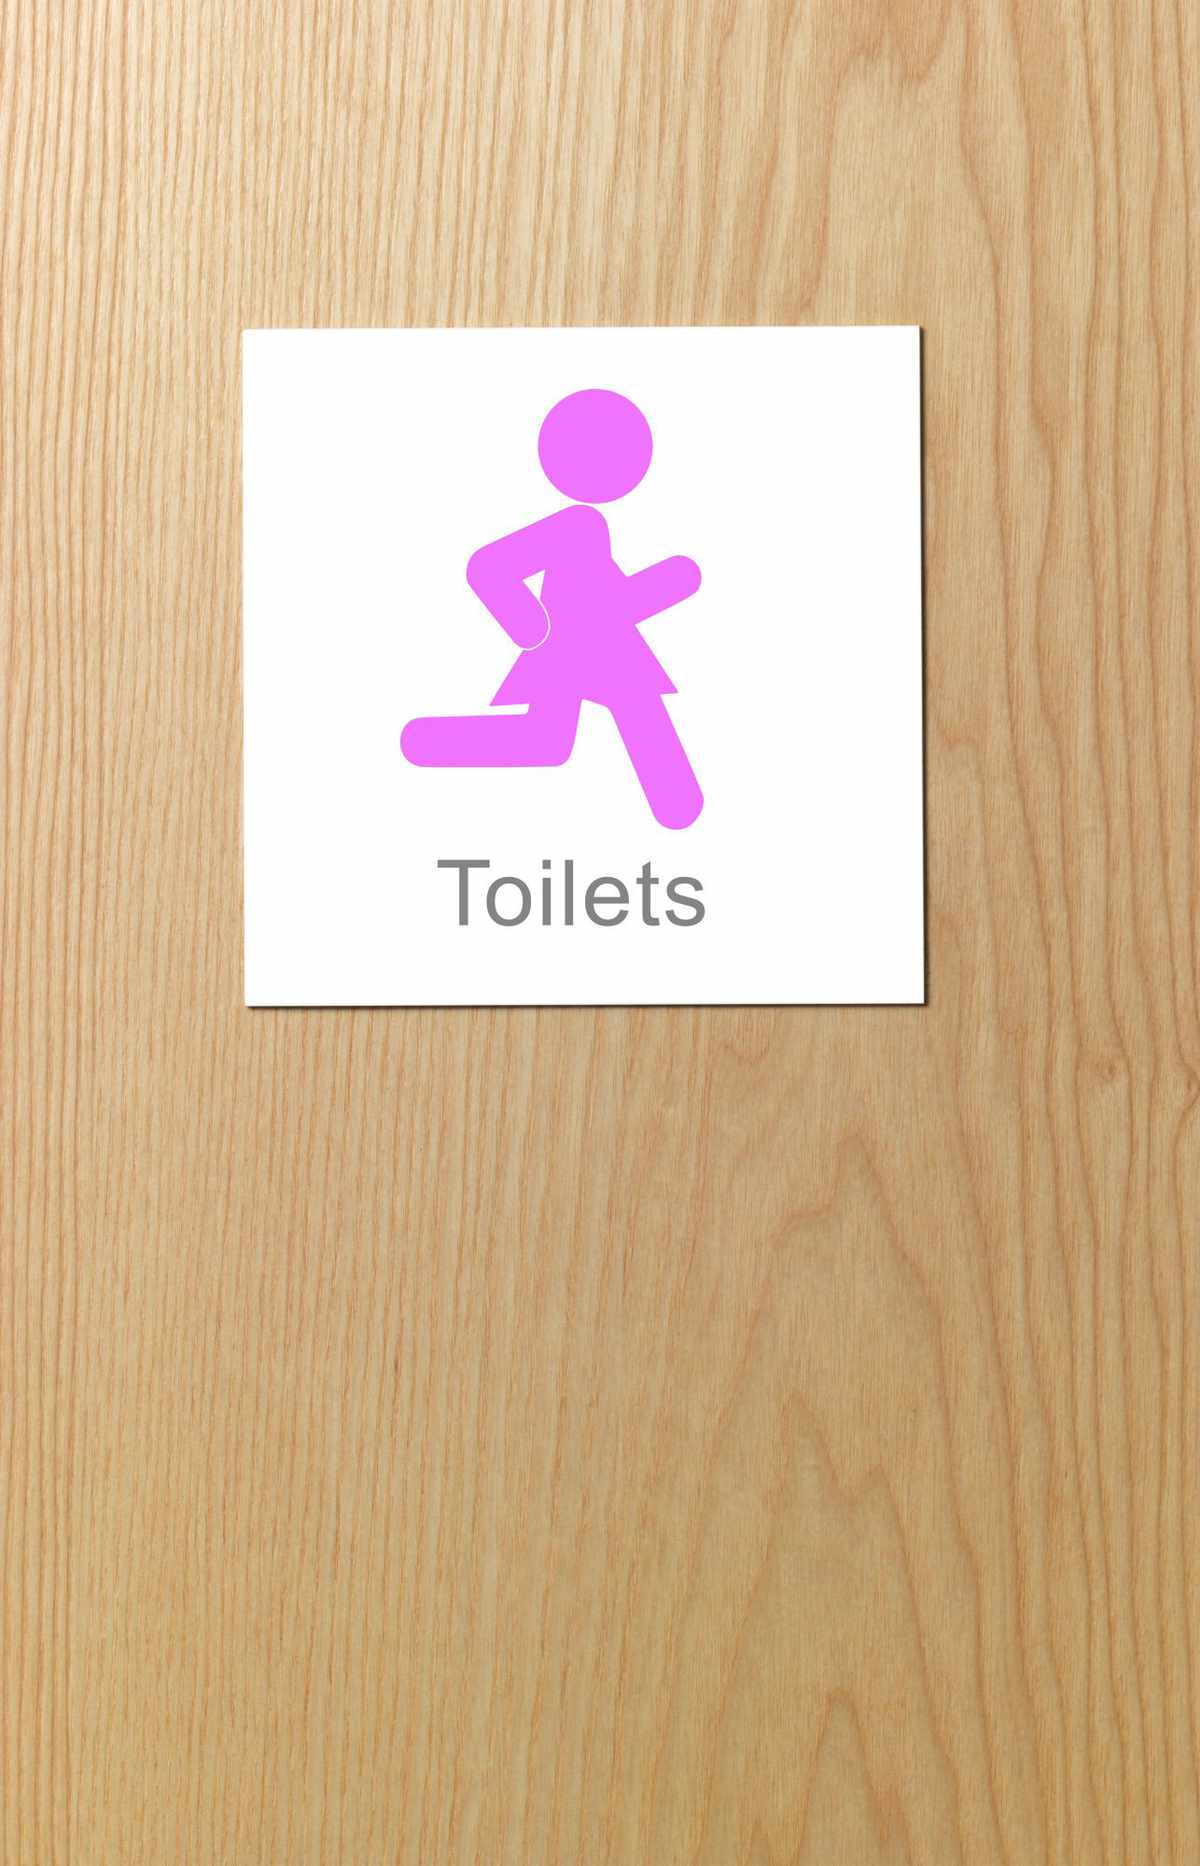 Urinate frequently